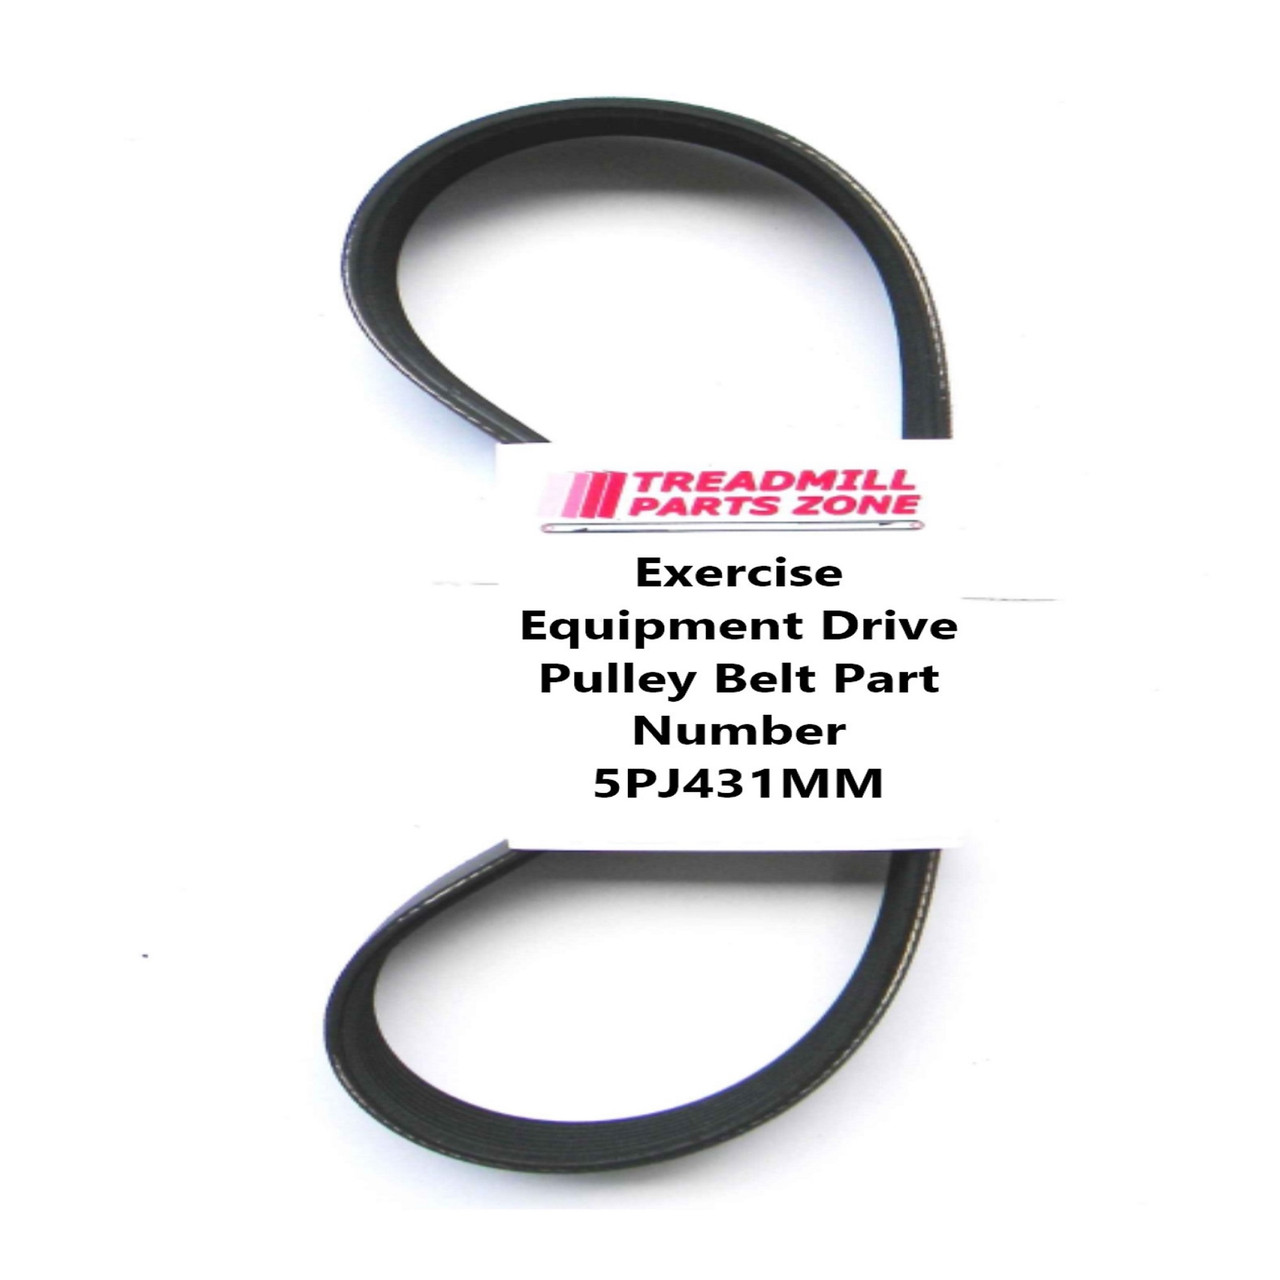 Exercise Equipment Drive Pulley Belt Part Number 5PJ431MM